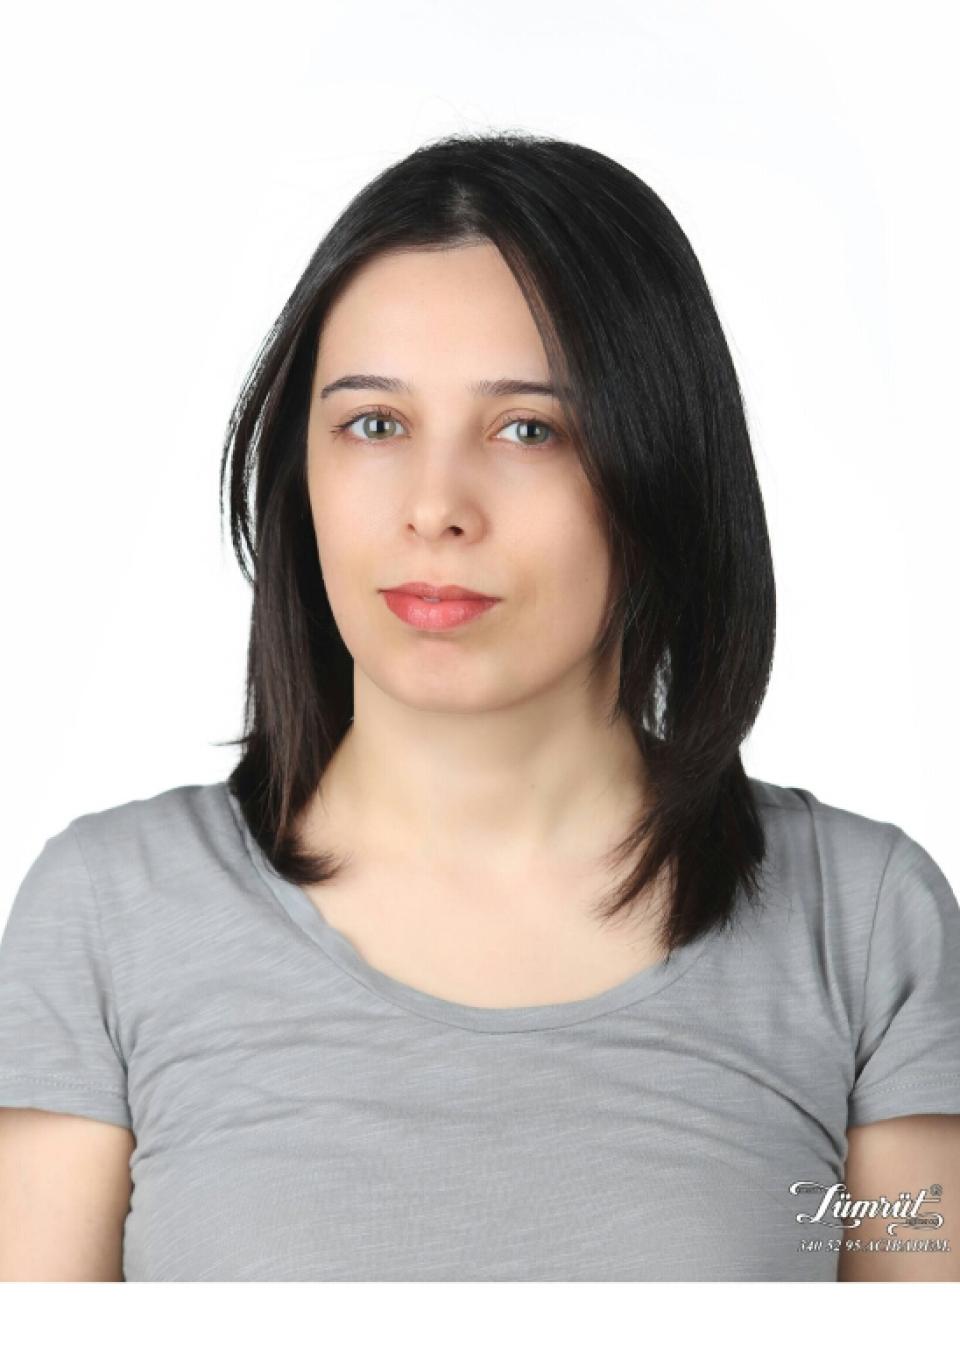 A photo of Dr. Ebru Eren, a white woman with mid length dark hair and wearing a grey shirt.